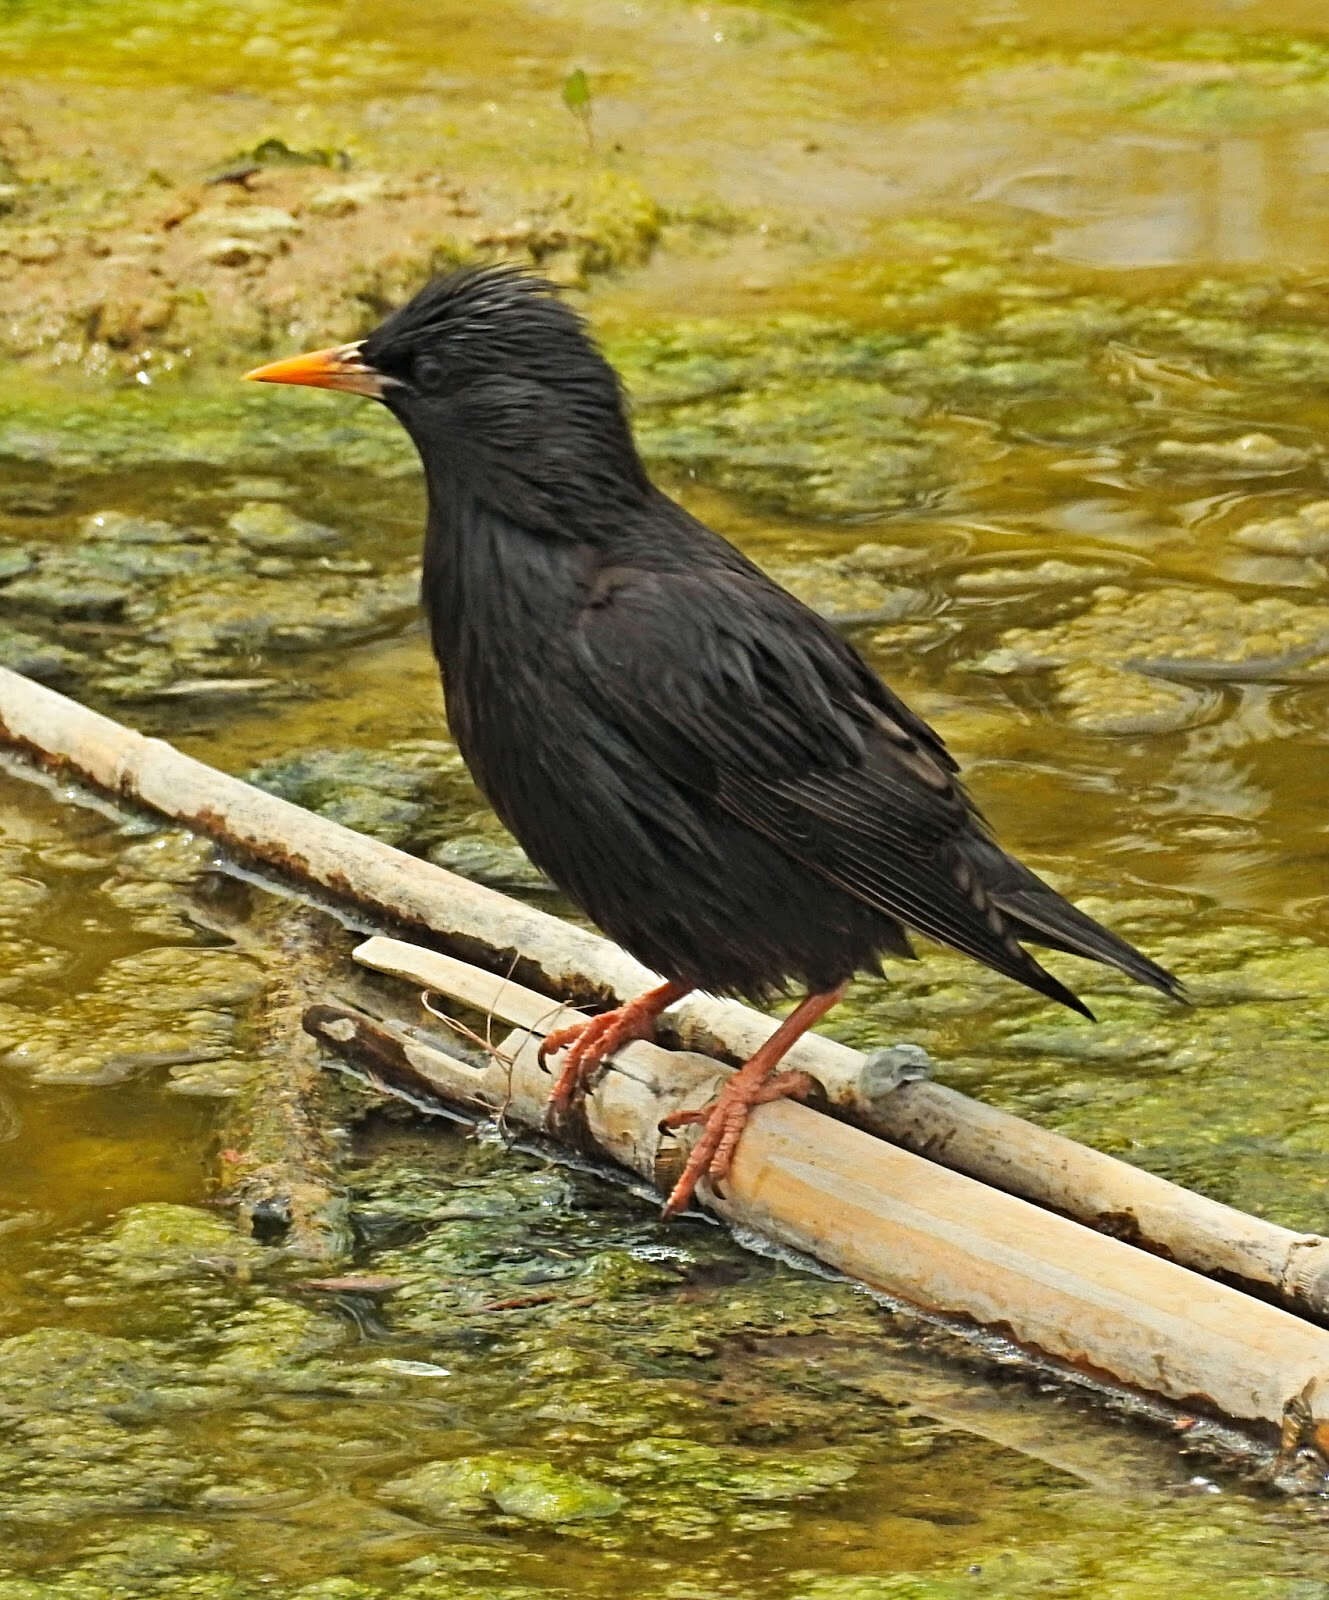 Image of Spotless Starling